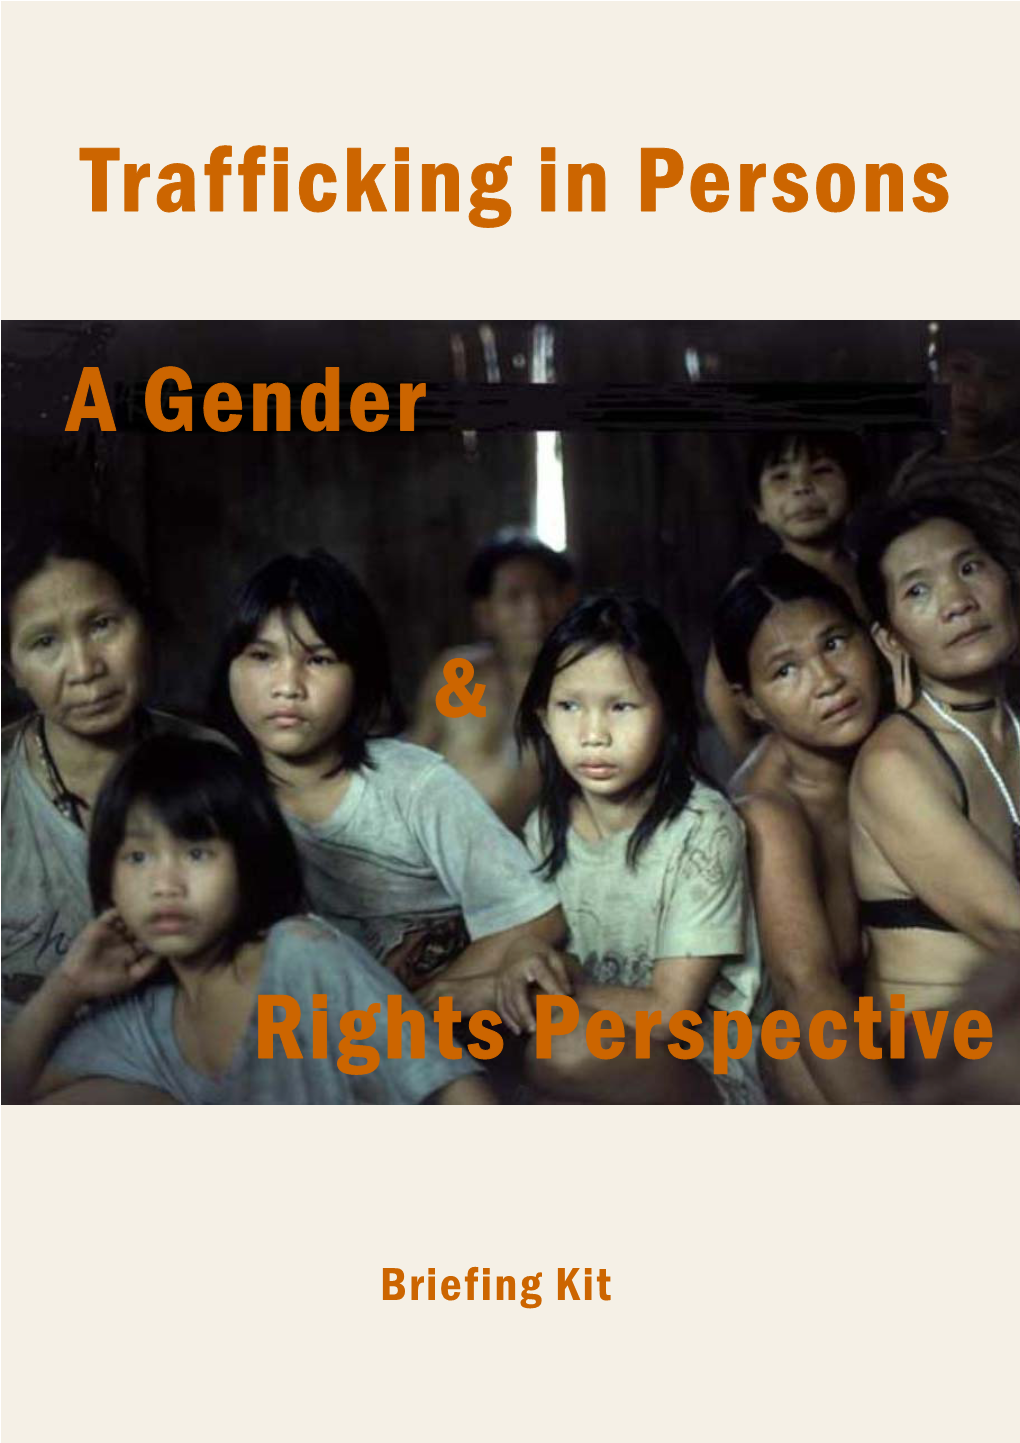 Trafficking in Persons Rights Perspective